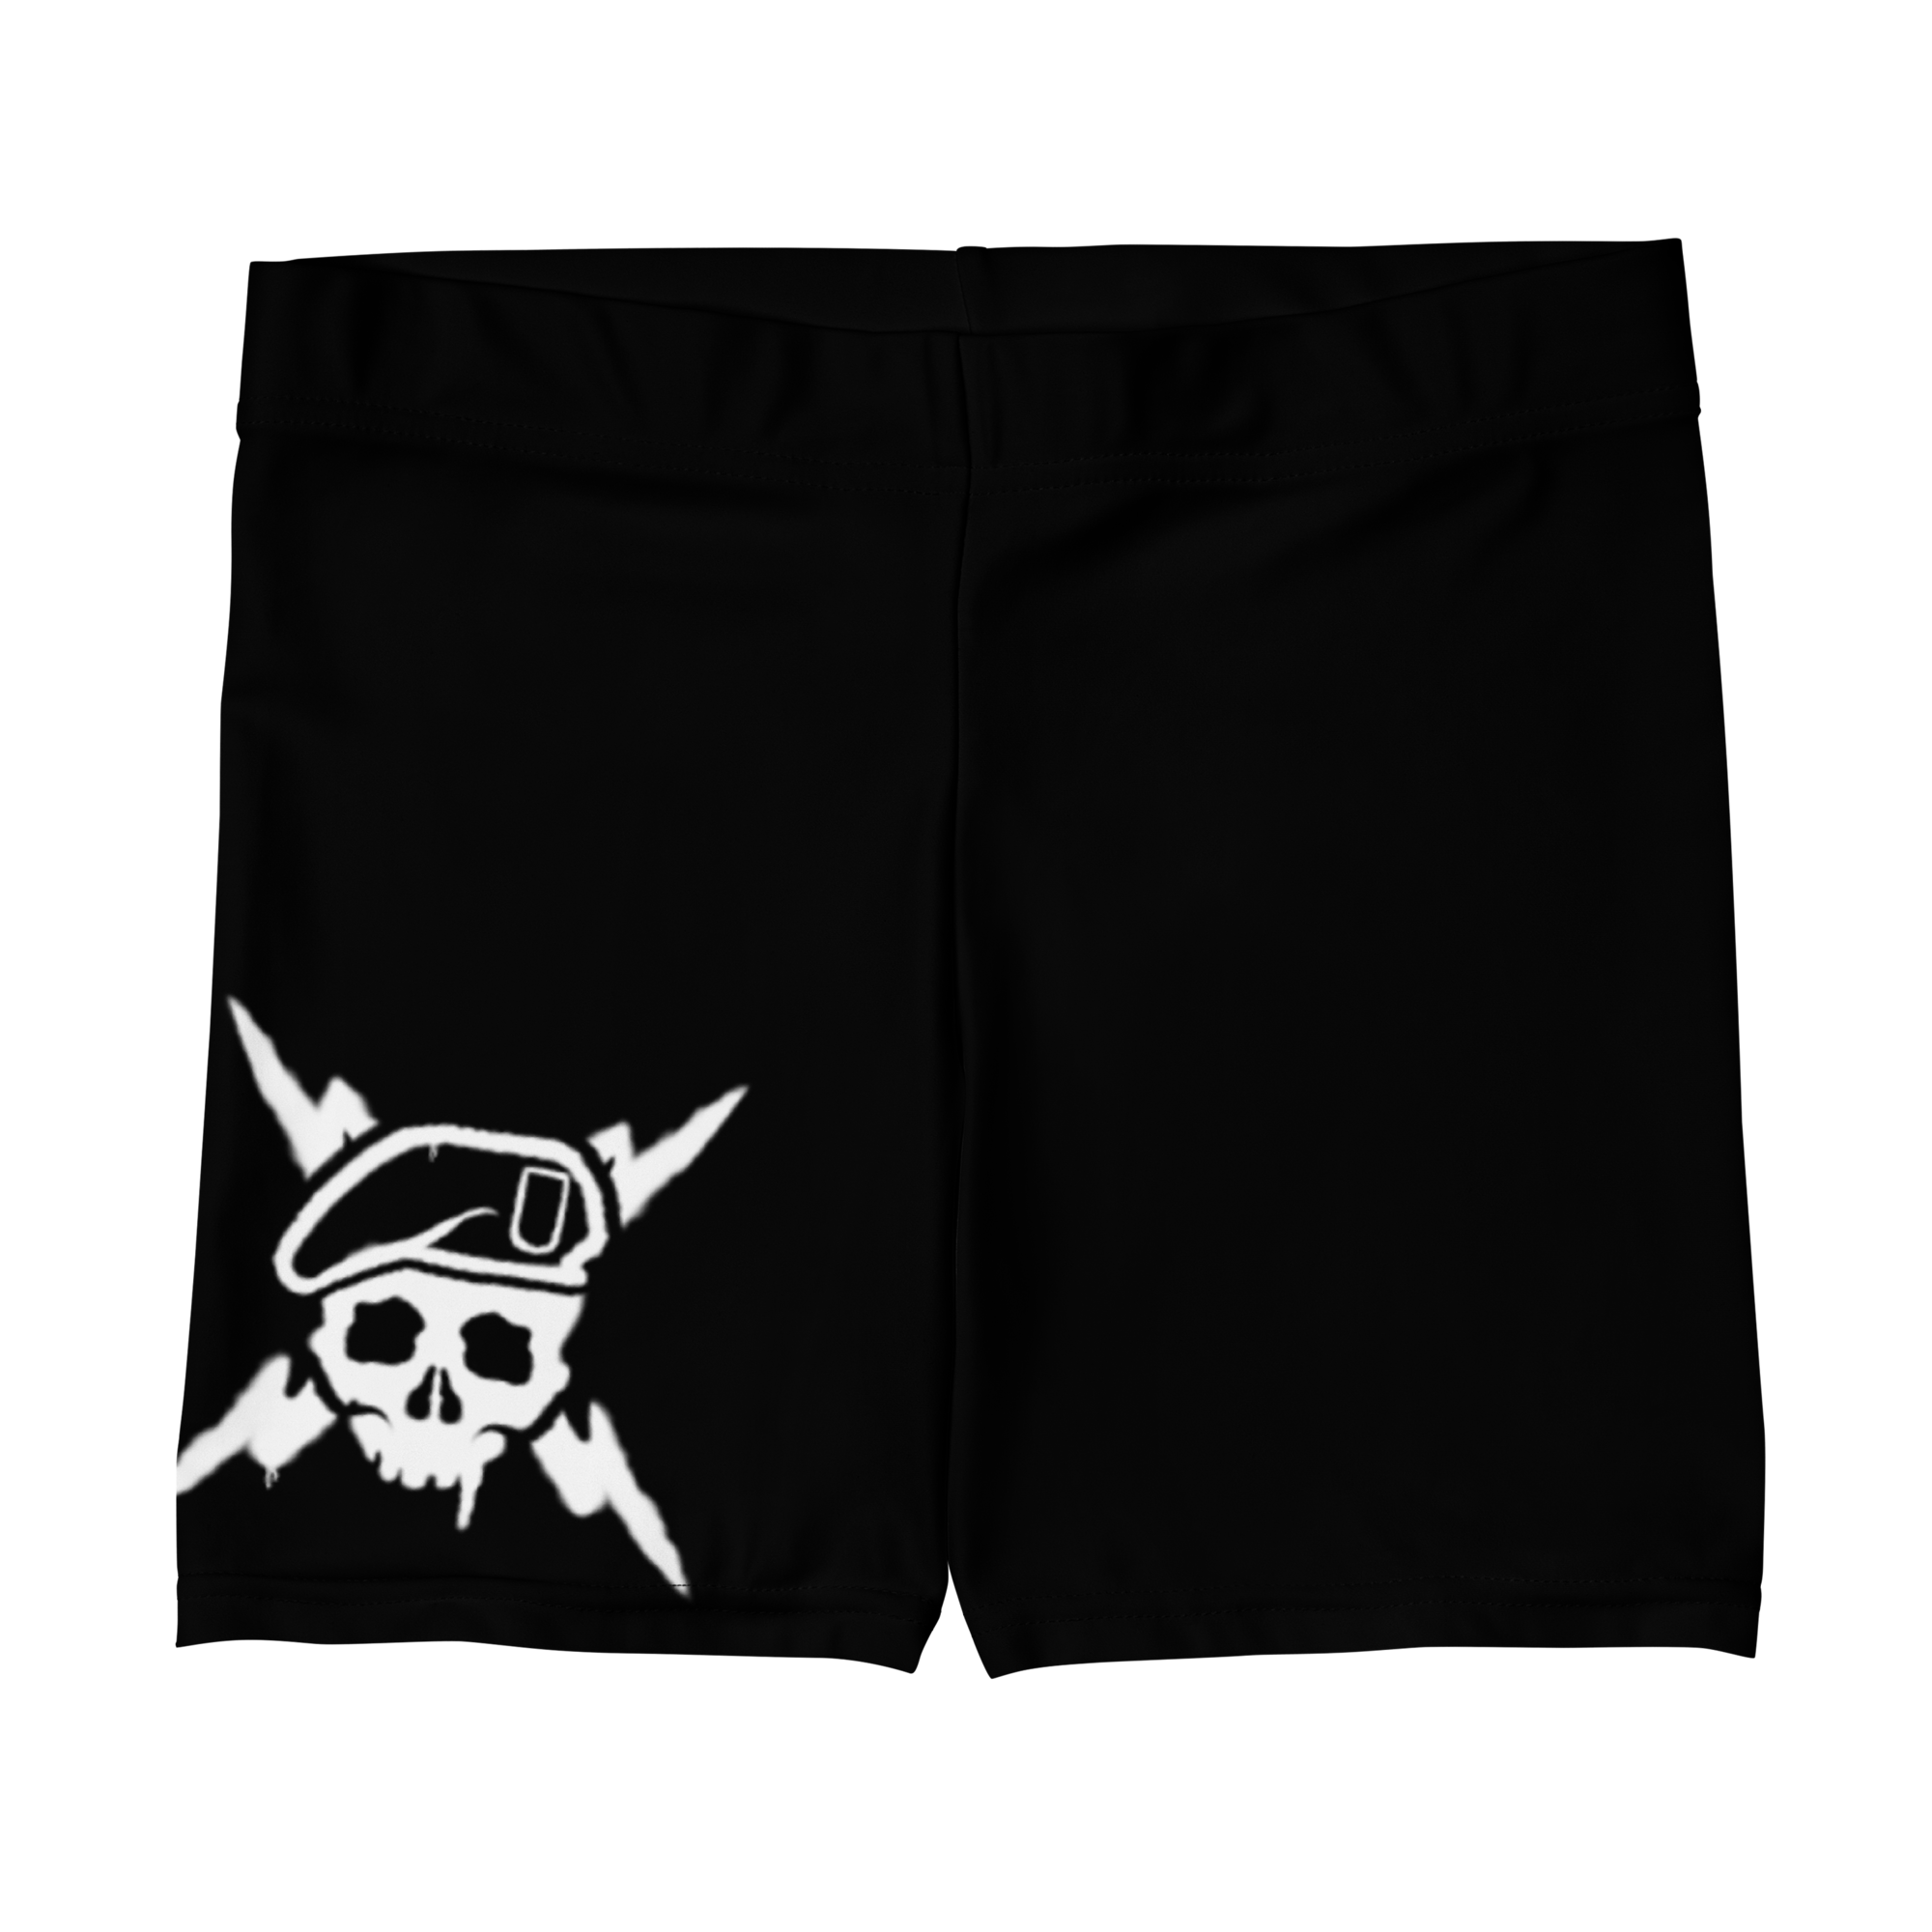 The women's stretch shorts - OVR & OUT